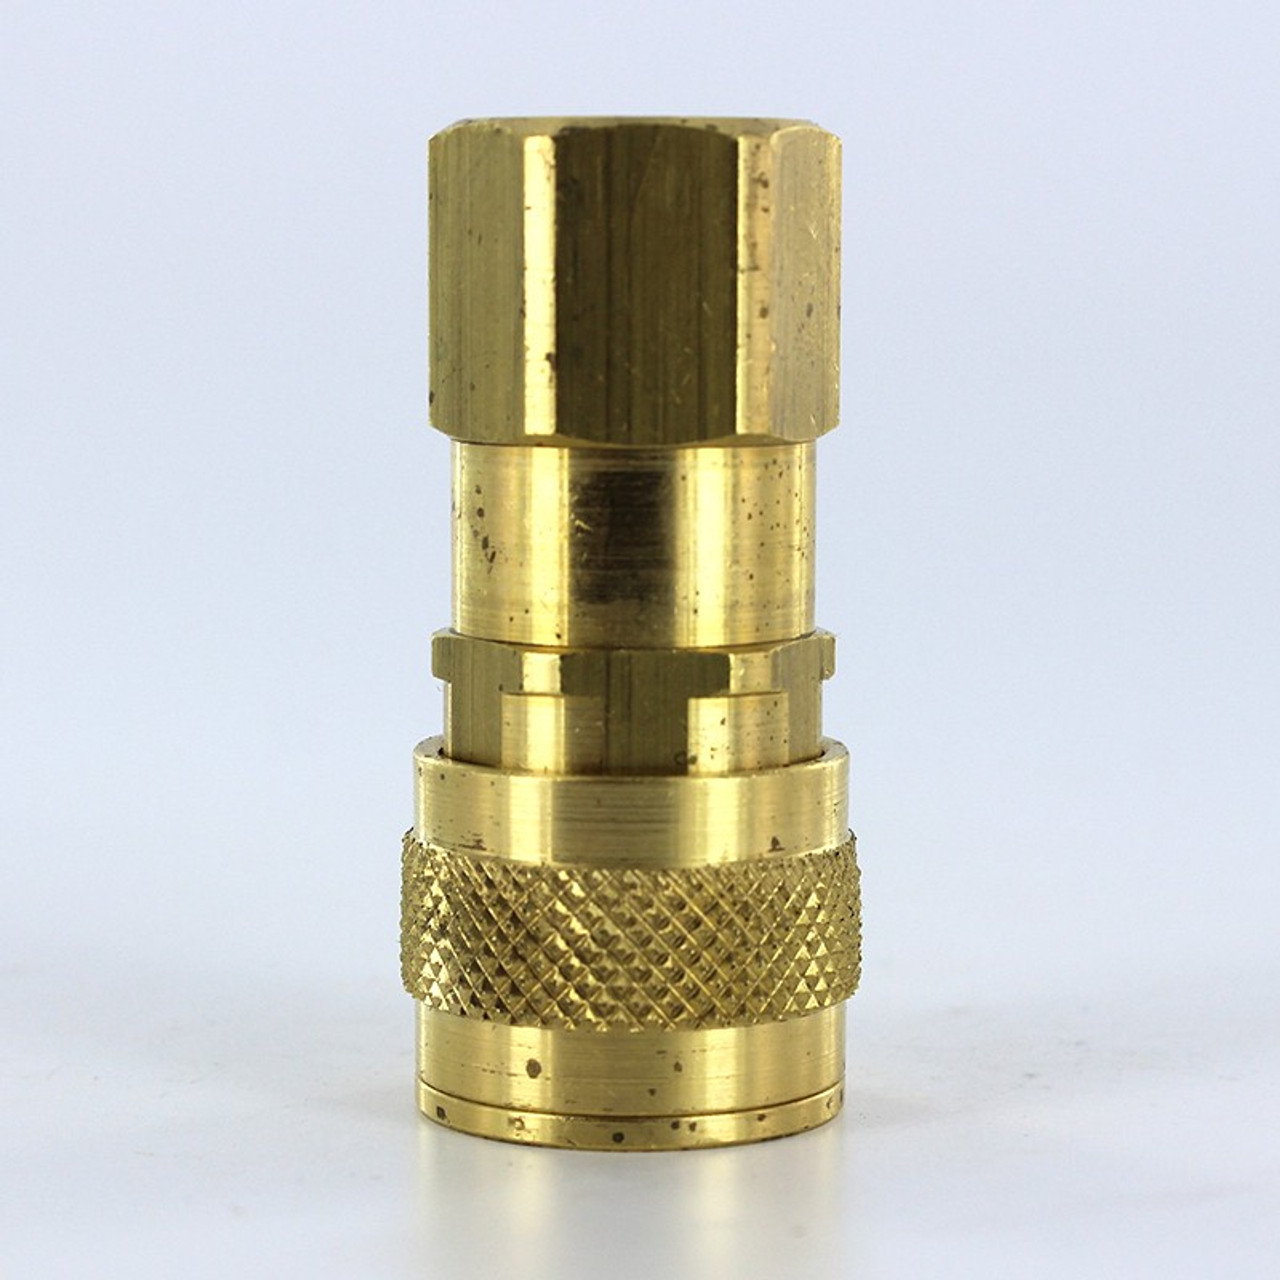 Parker Uc-251-4Fp Universal Series Coupler Brass 1/4" Body Size 1/4" Npt Female Port General Purpose Accepts Industrial Interchange (A-A-59439 Mil-C-4109F Iso 6150-B) Tru-Flate & Aro 210 Nipples 150Psi (10Bar) Wp Nbr Seals Temp F: (-40 To +250)